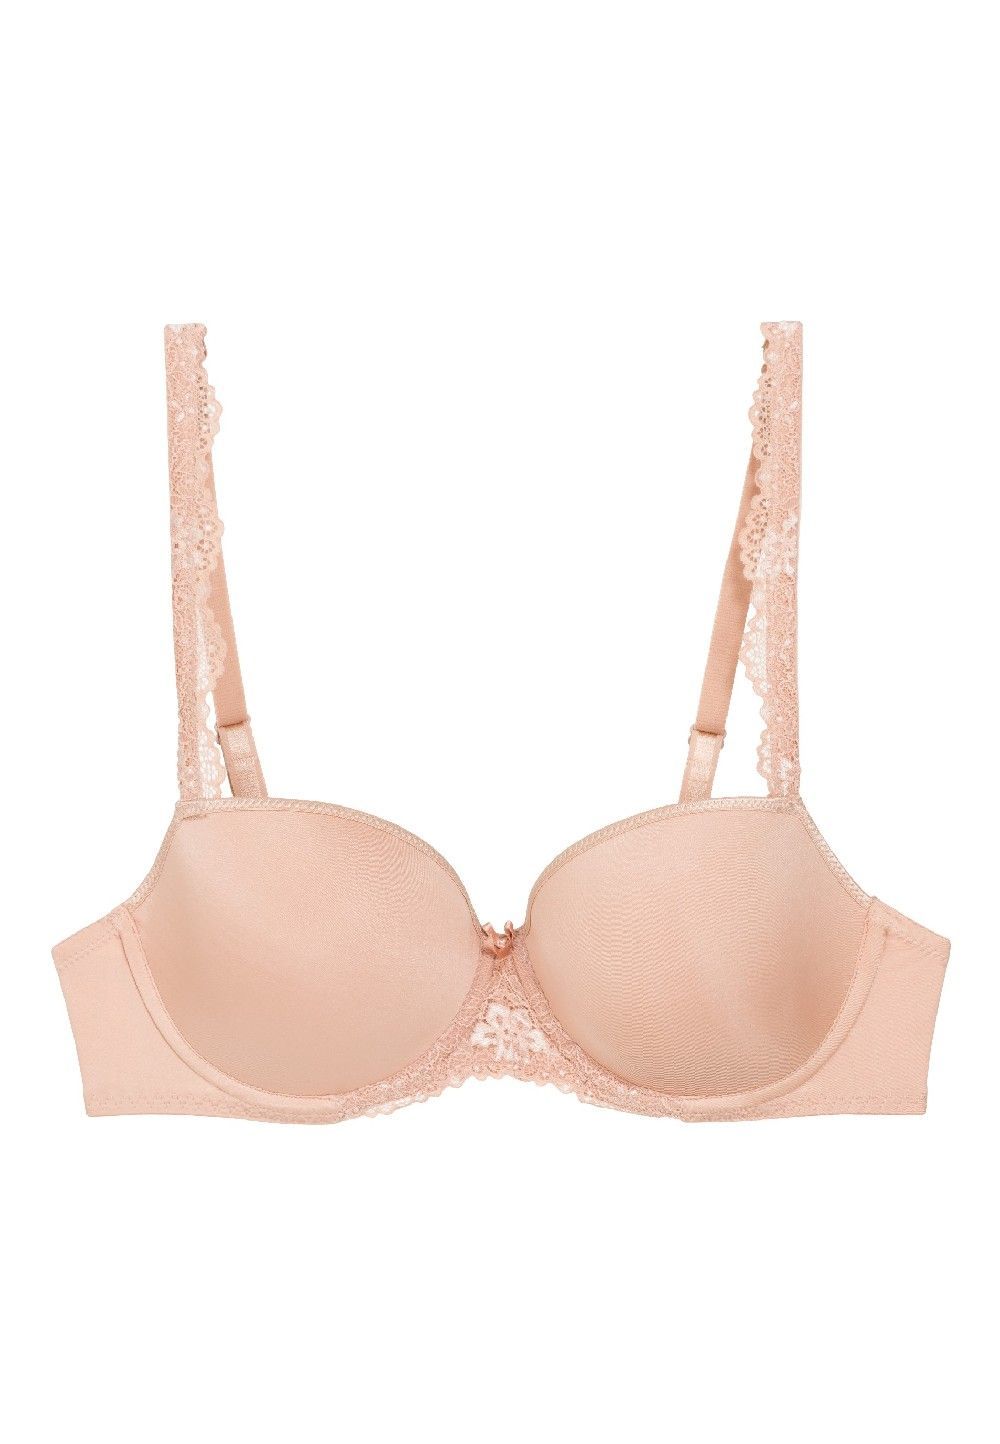 LingaDore Daily Lace Balconette - Underwire Bra  Available at Illusions Lingerie